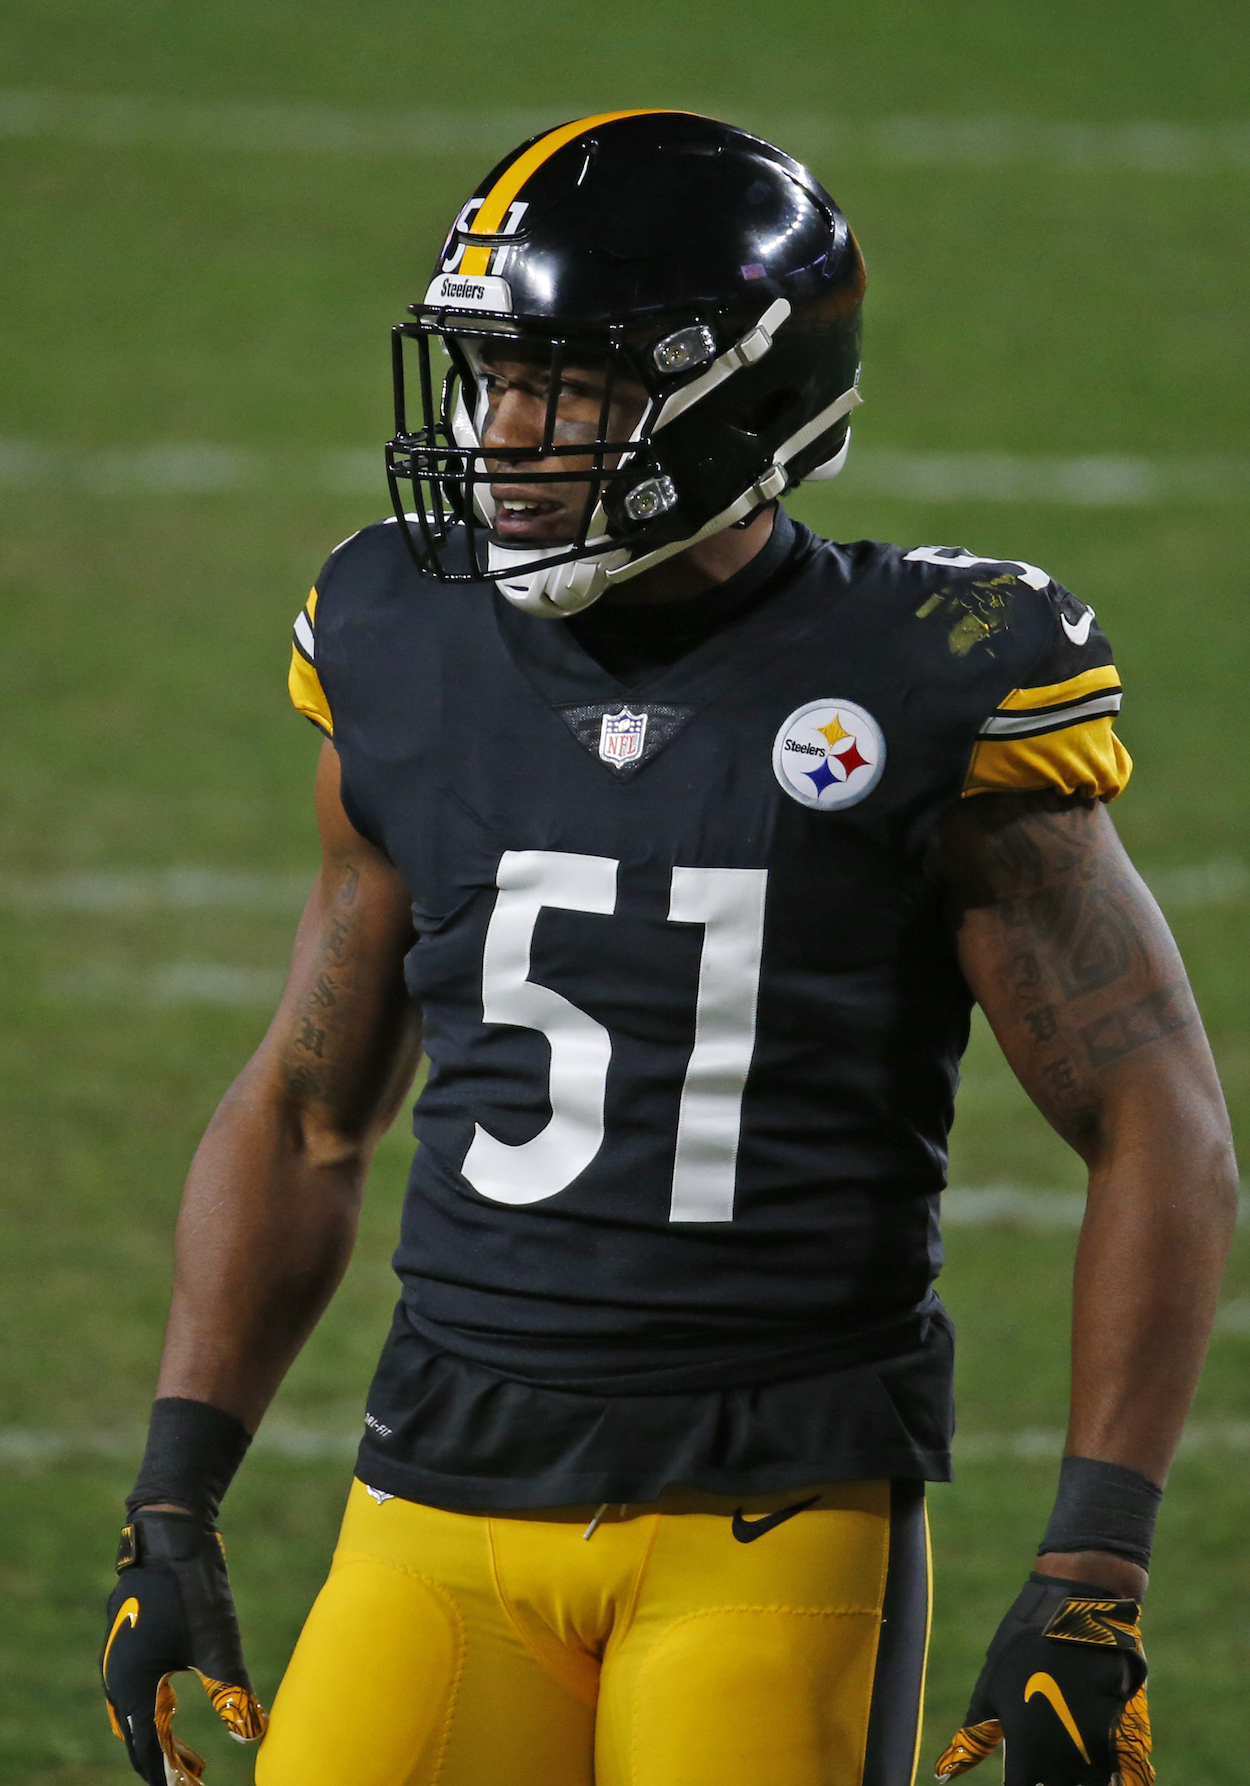 Avery Williamson playing for the Steelers, a division rival of the Baltimore Ravens.